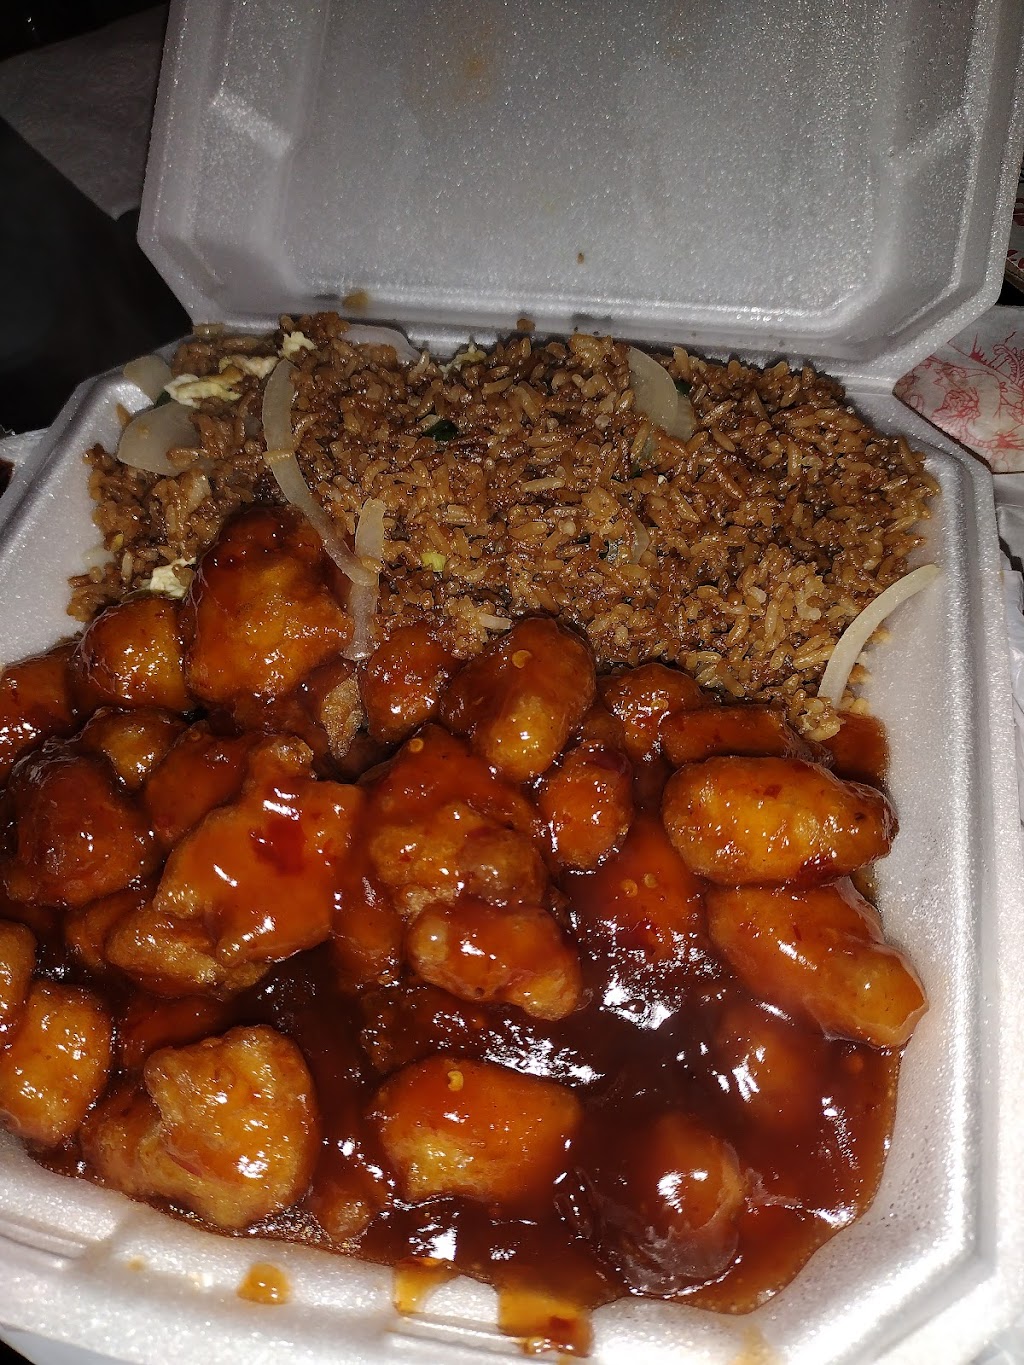 Jackie Chens Asian Diner | 2199 Brookpark Rd, Cleveland, OH 44134 | Phone: (216) 739-0988